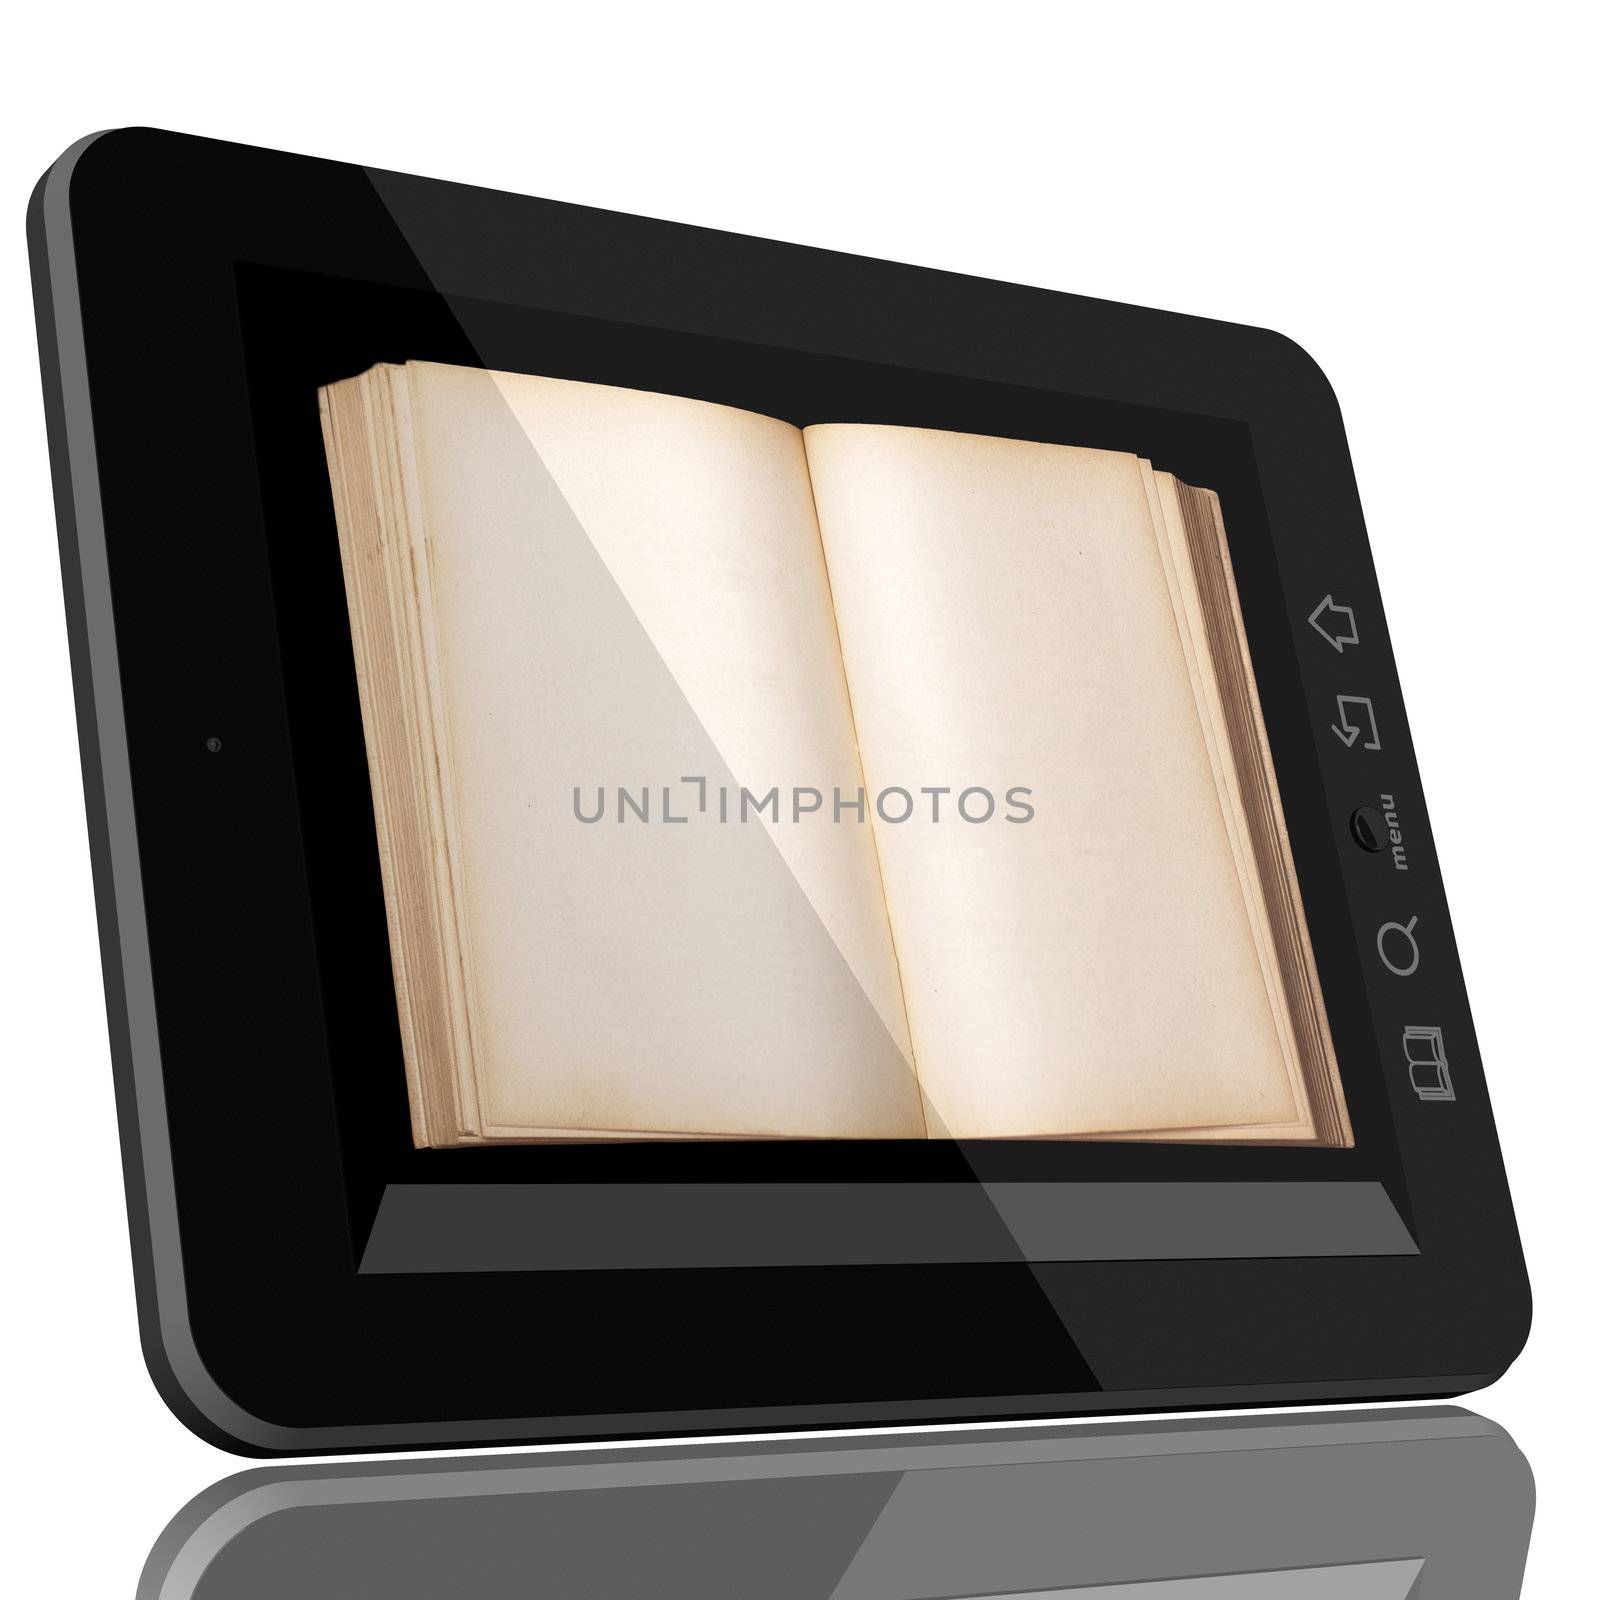 Tablet PC Computer and book - Digital Library Concept by adamr